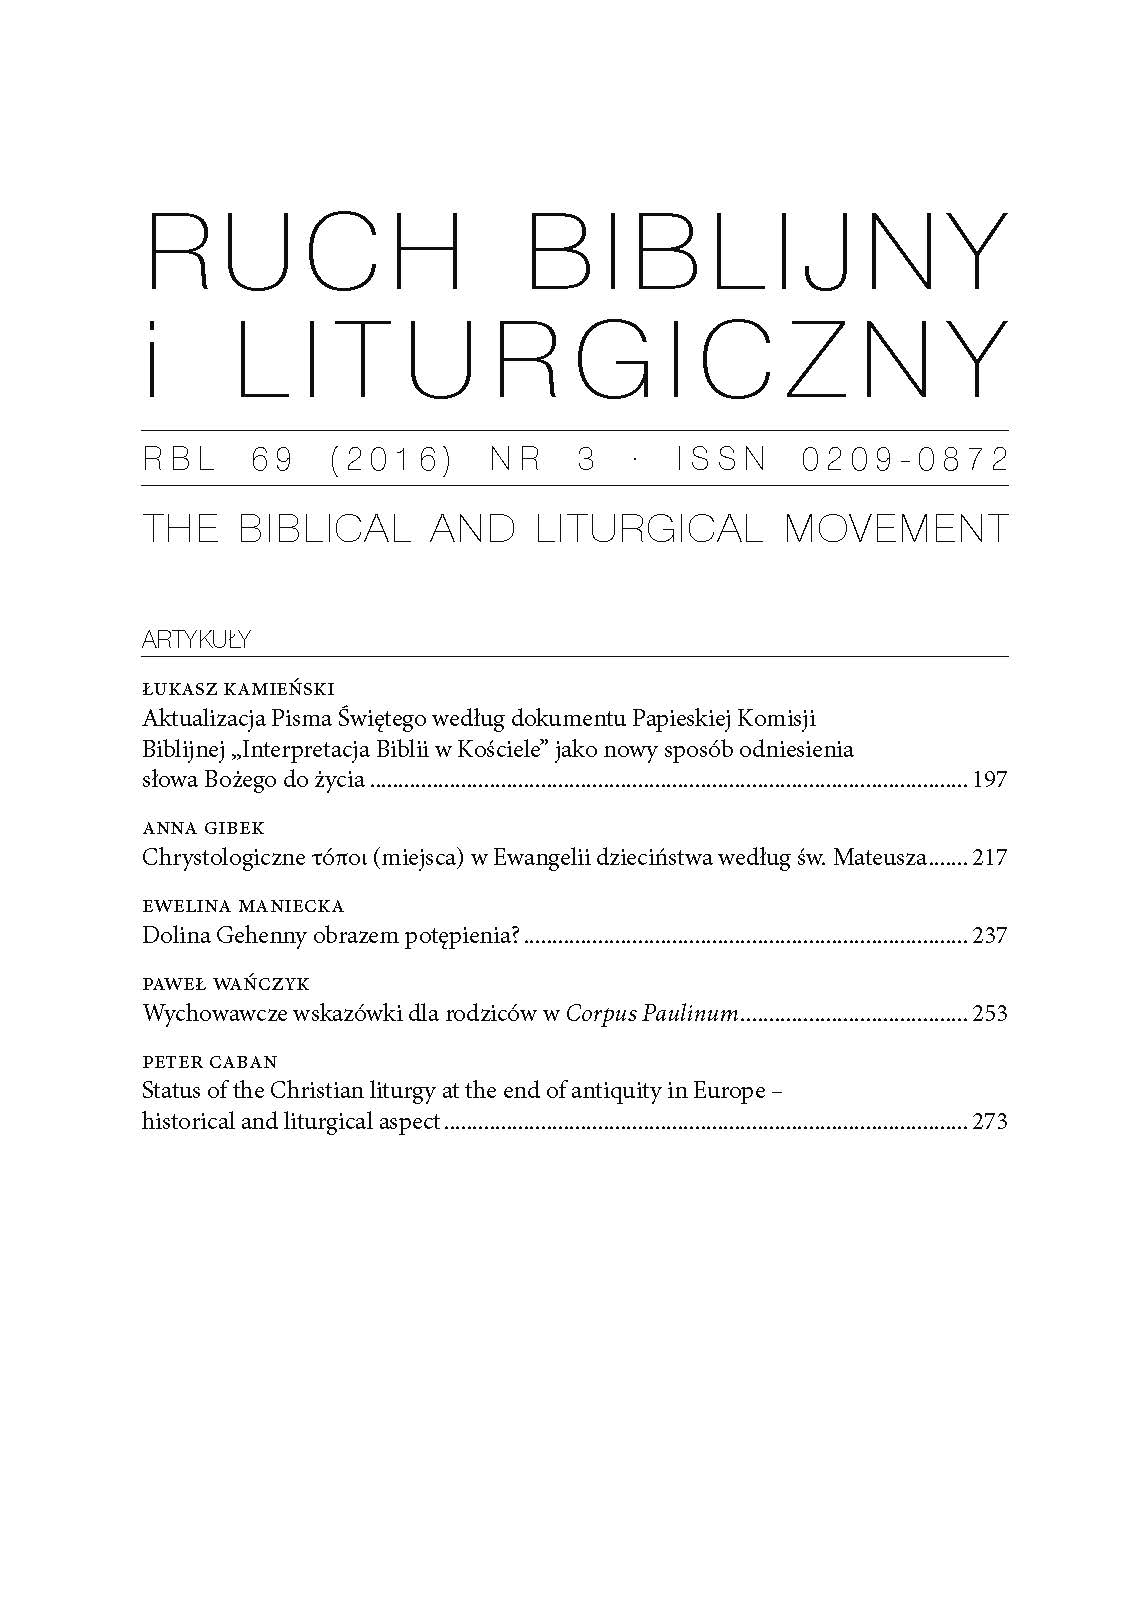 Report of the President of the Theological Polish Society for 2009 Cover Image